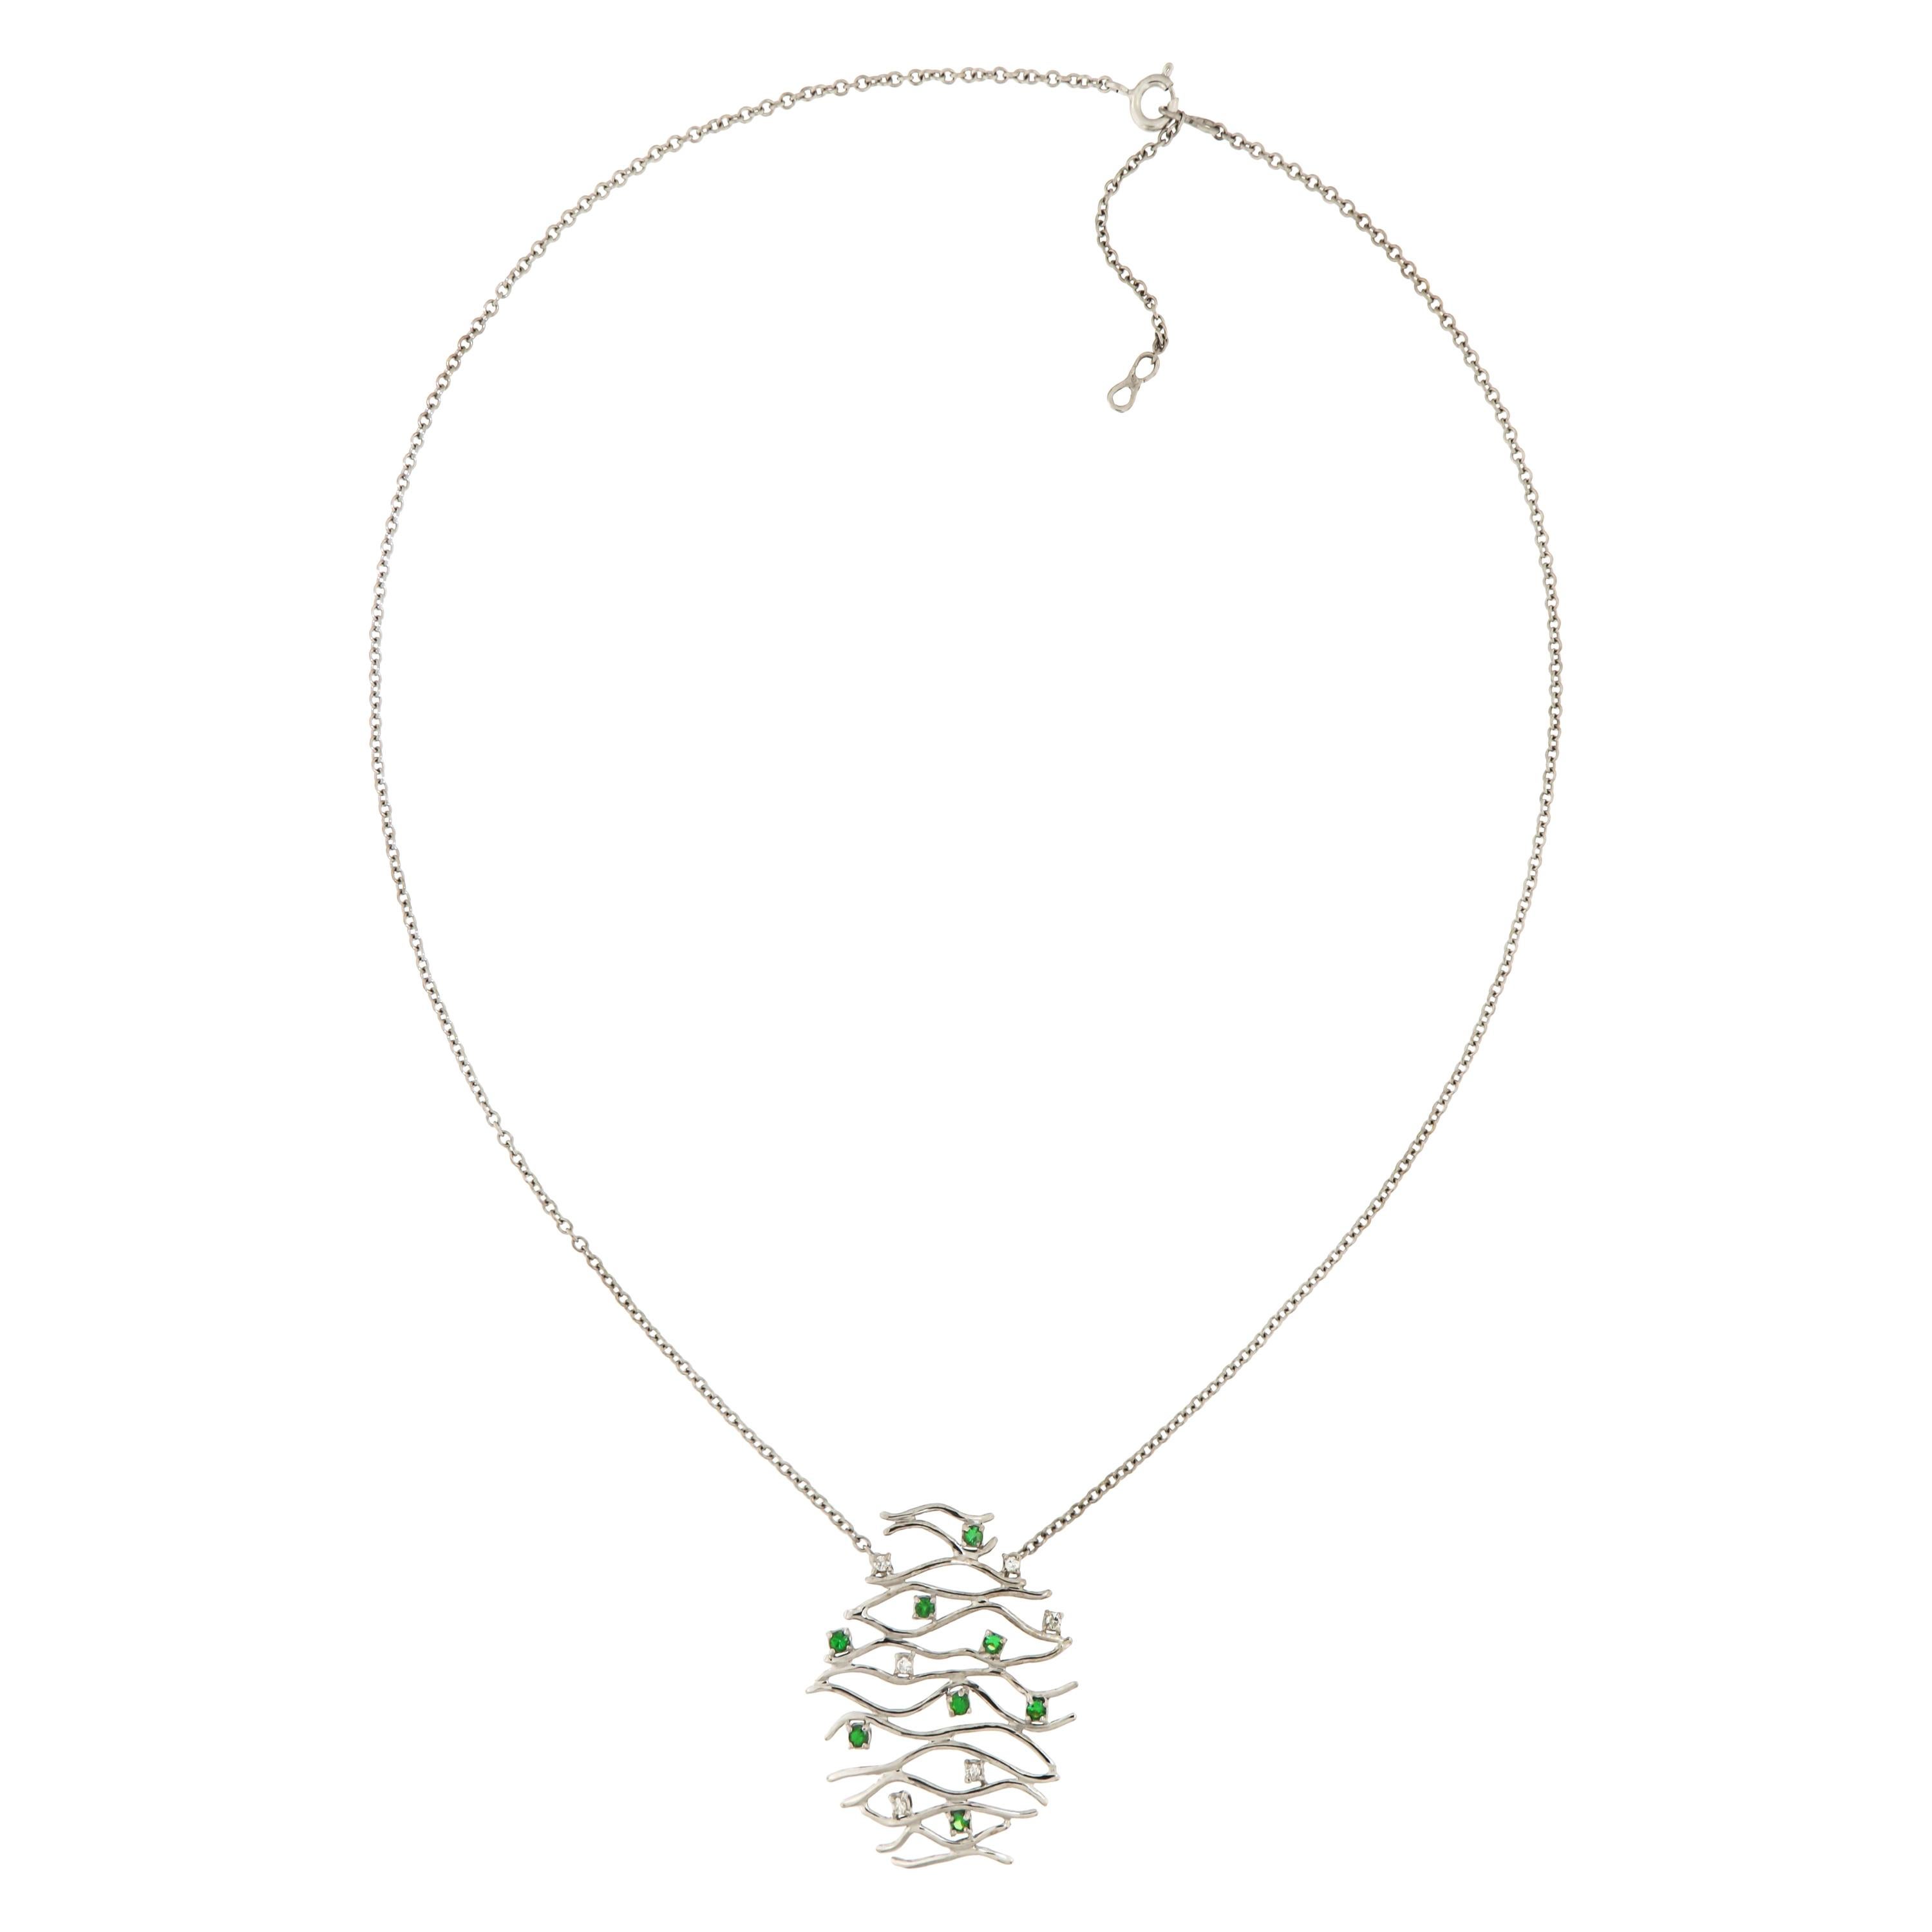 Diamonds Tsavorites White Gold Necklace Handcrafted in Italy by Botta Gioielli